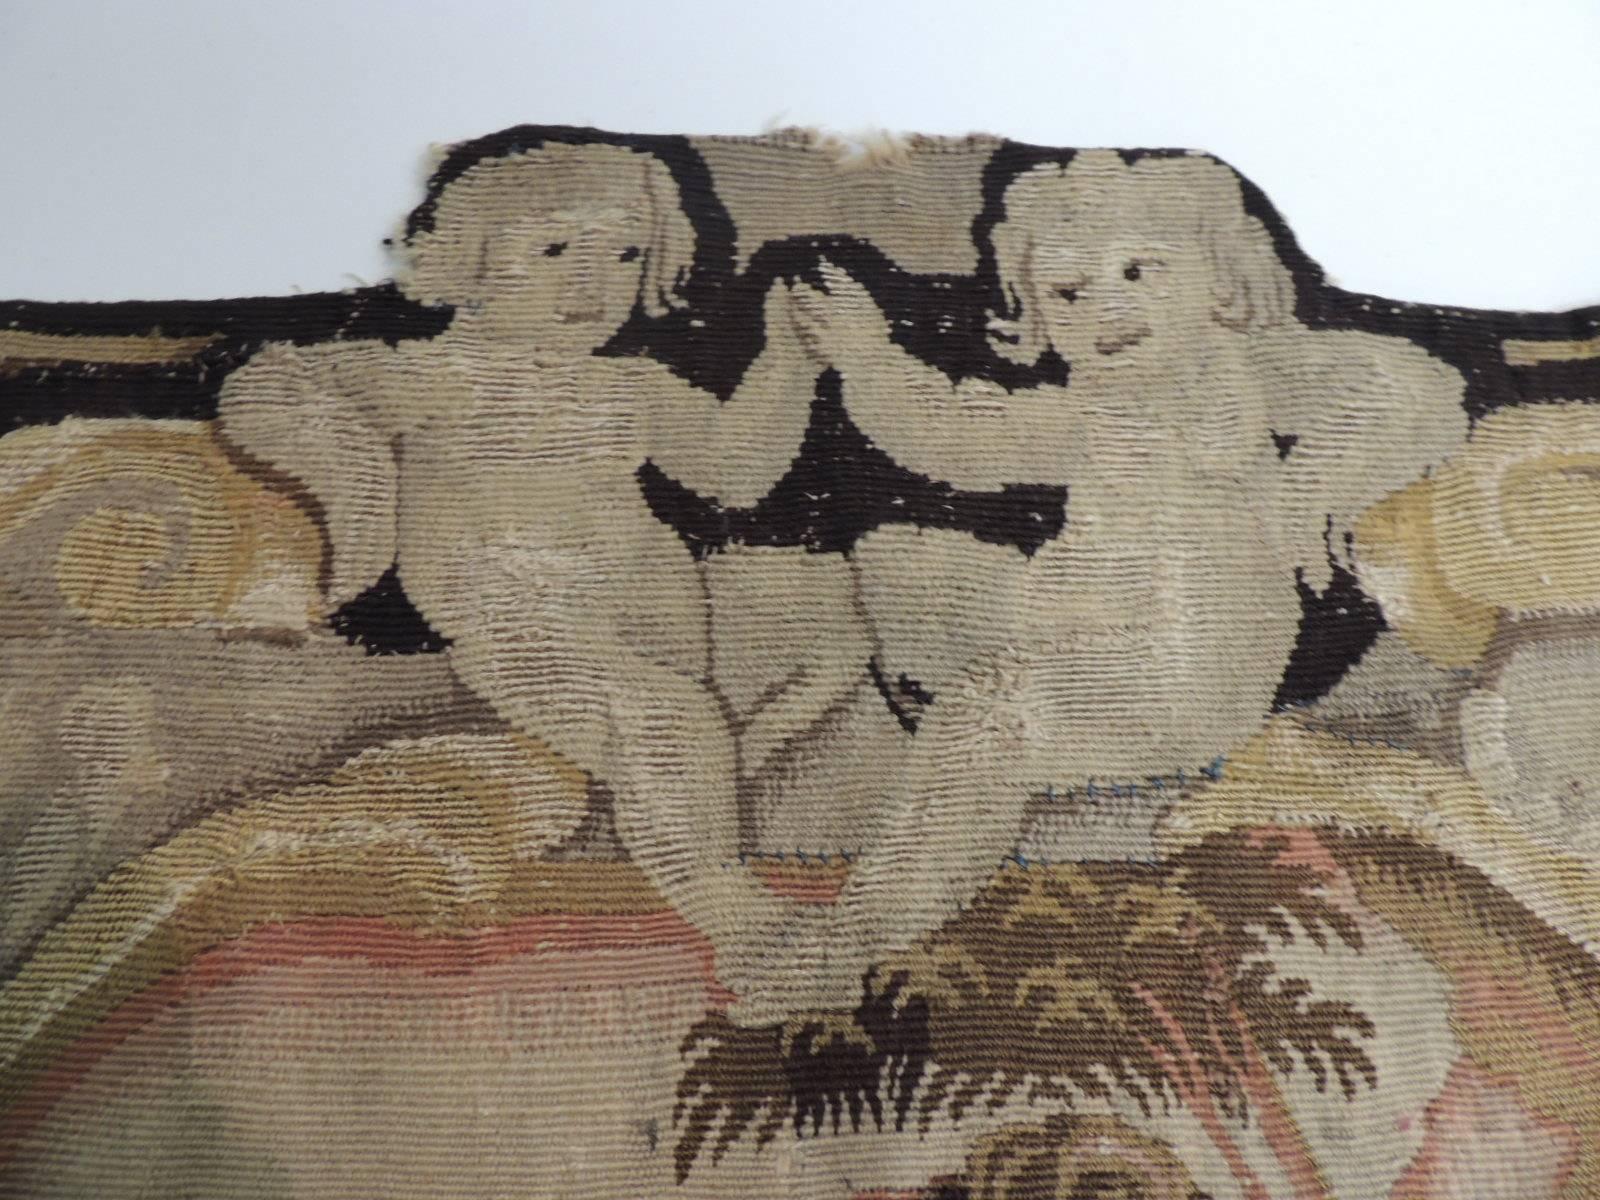 18th century large Aubusson tapestry panel. The motif depicts cherubs, rams and a young boy playing in the forest. 
Large Aubusson tapestry textile with a motif depicting cherubs, rams and a young boy playing in the fores. Antique Aubusson textile